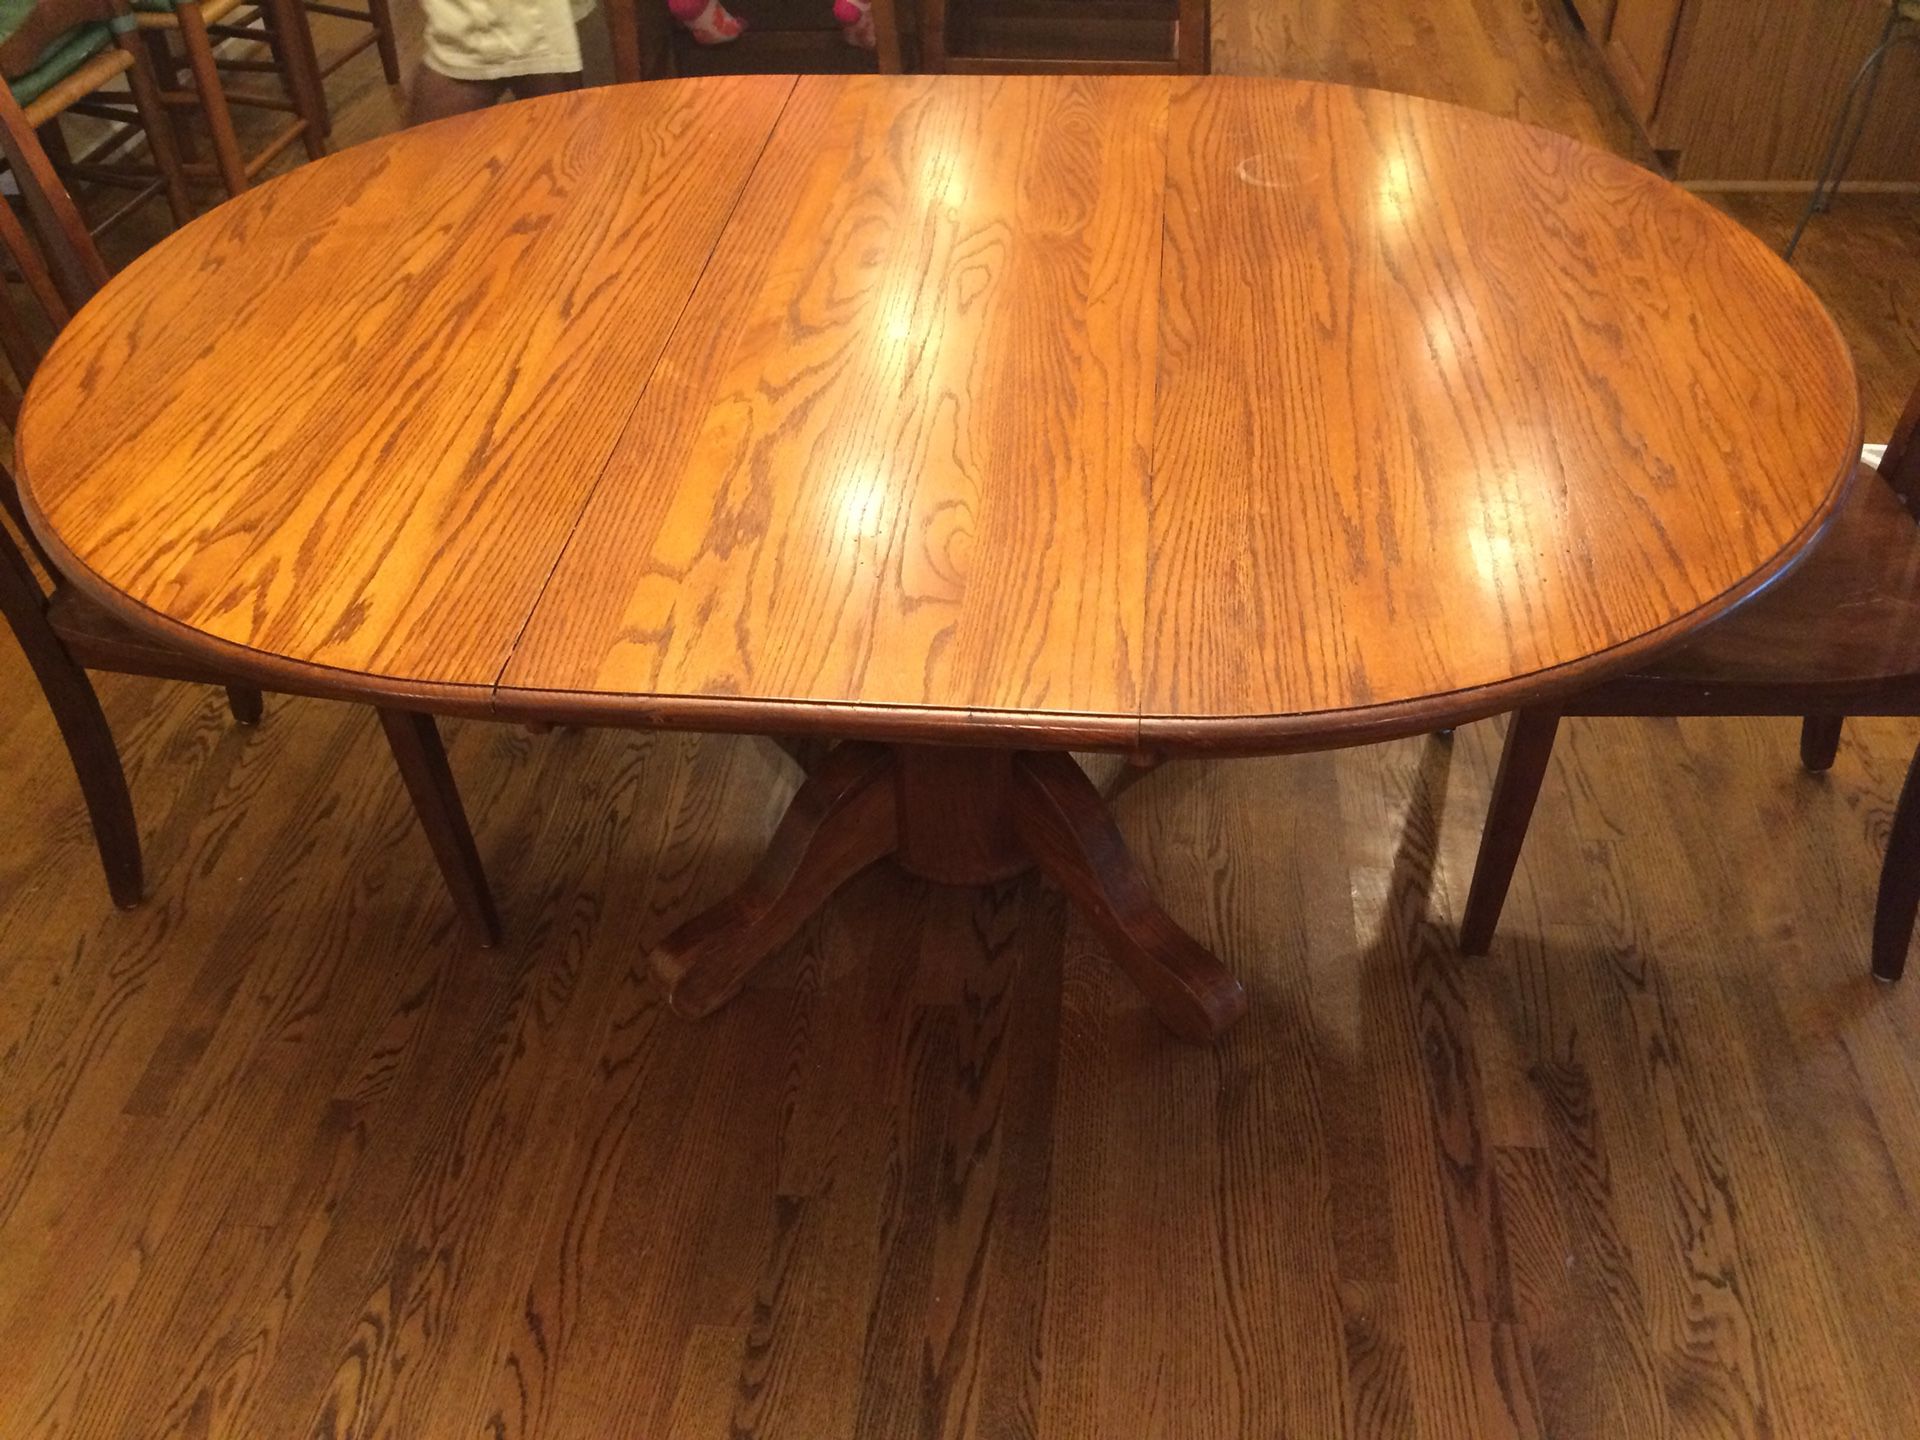 Dining room table with expandable leaf